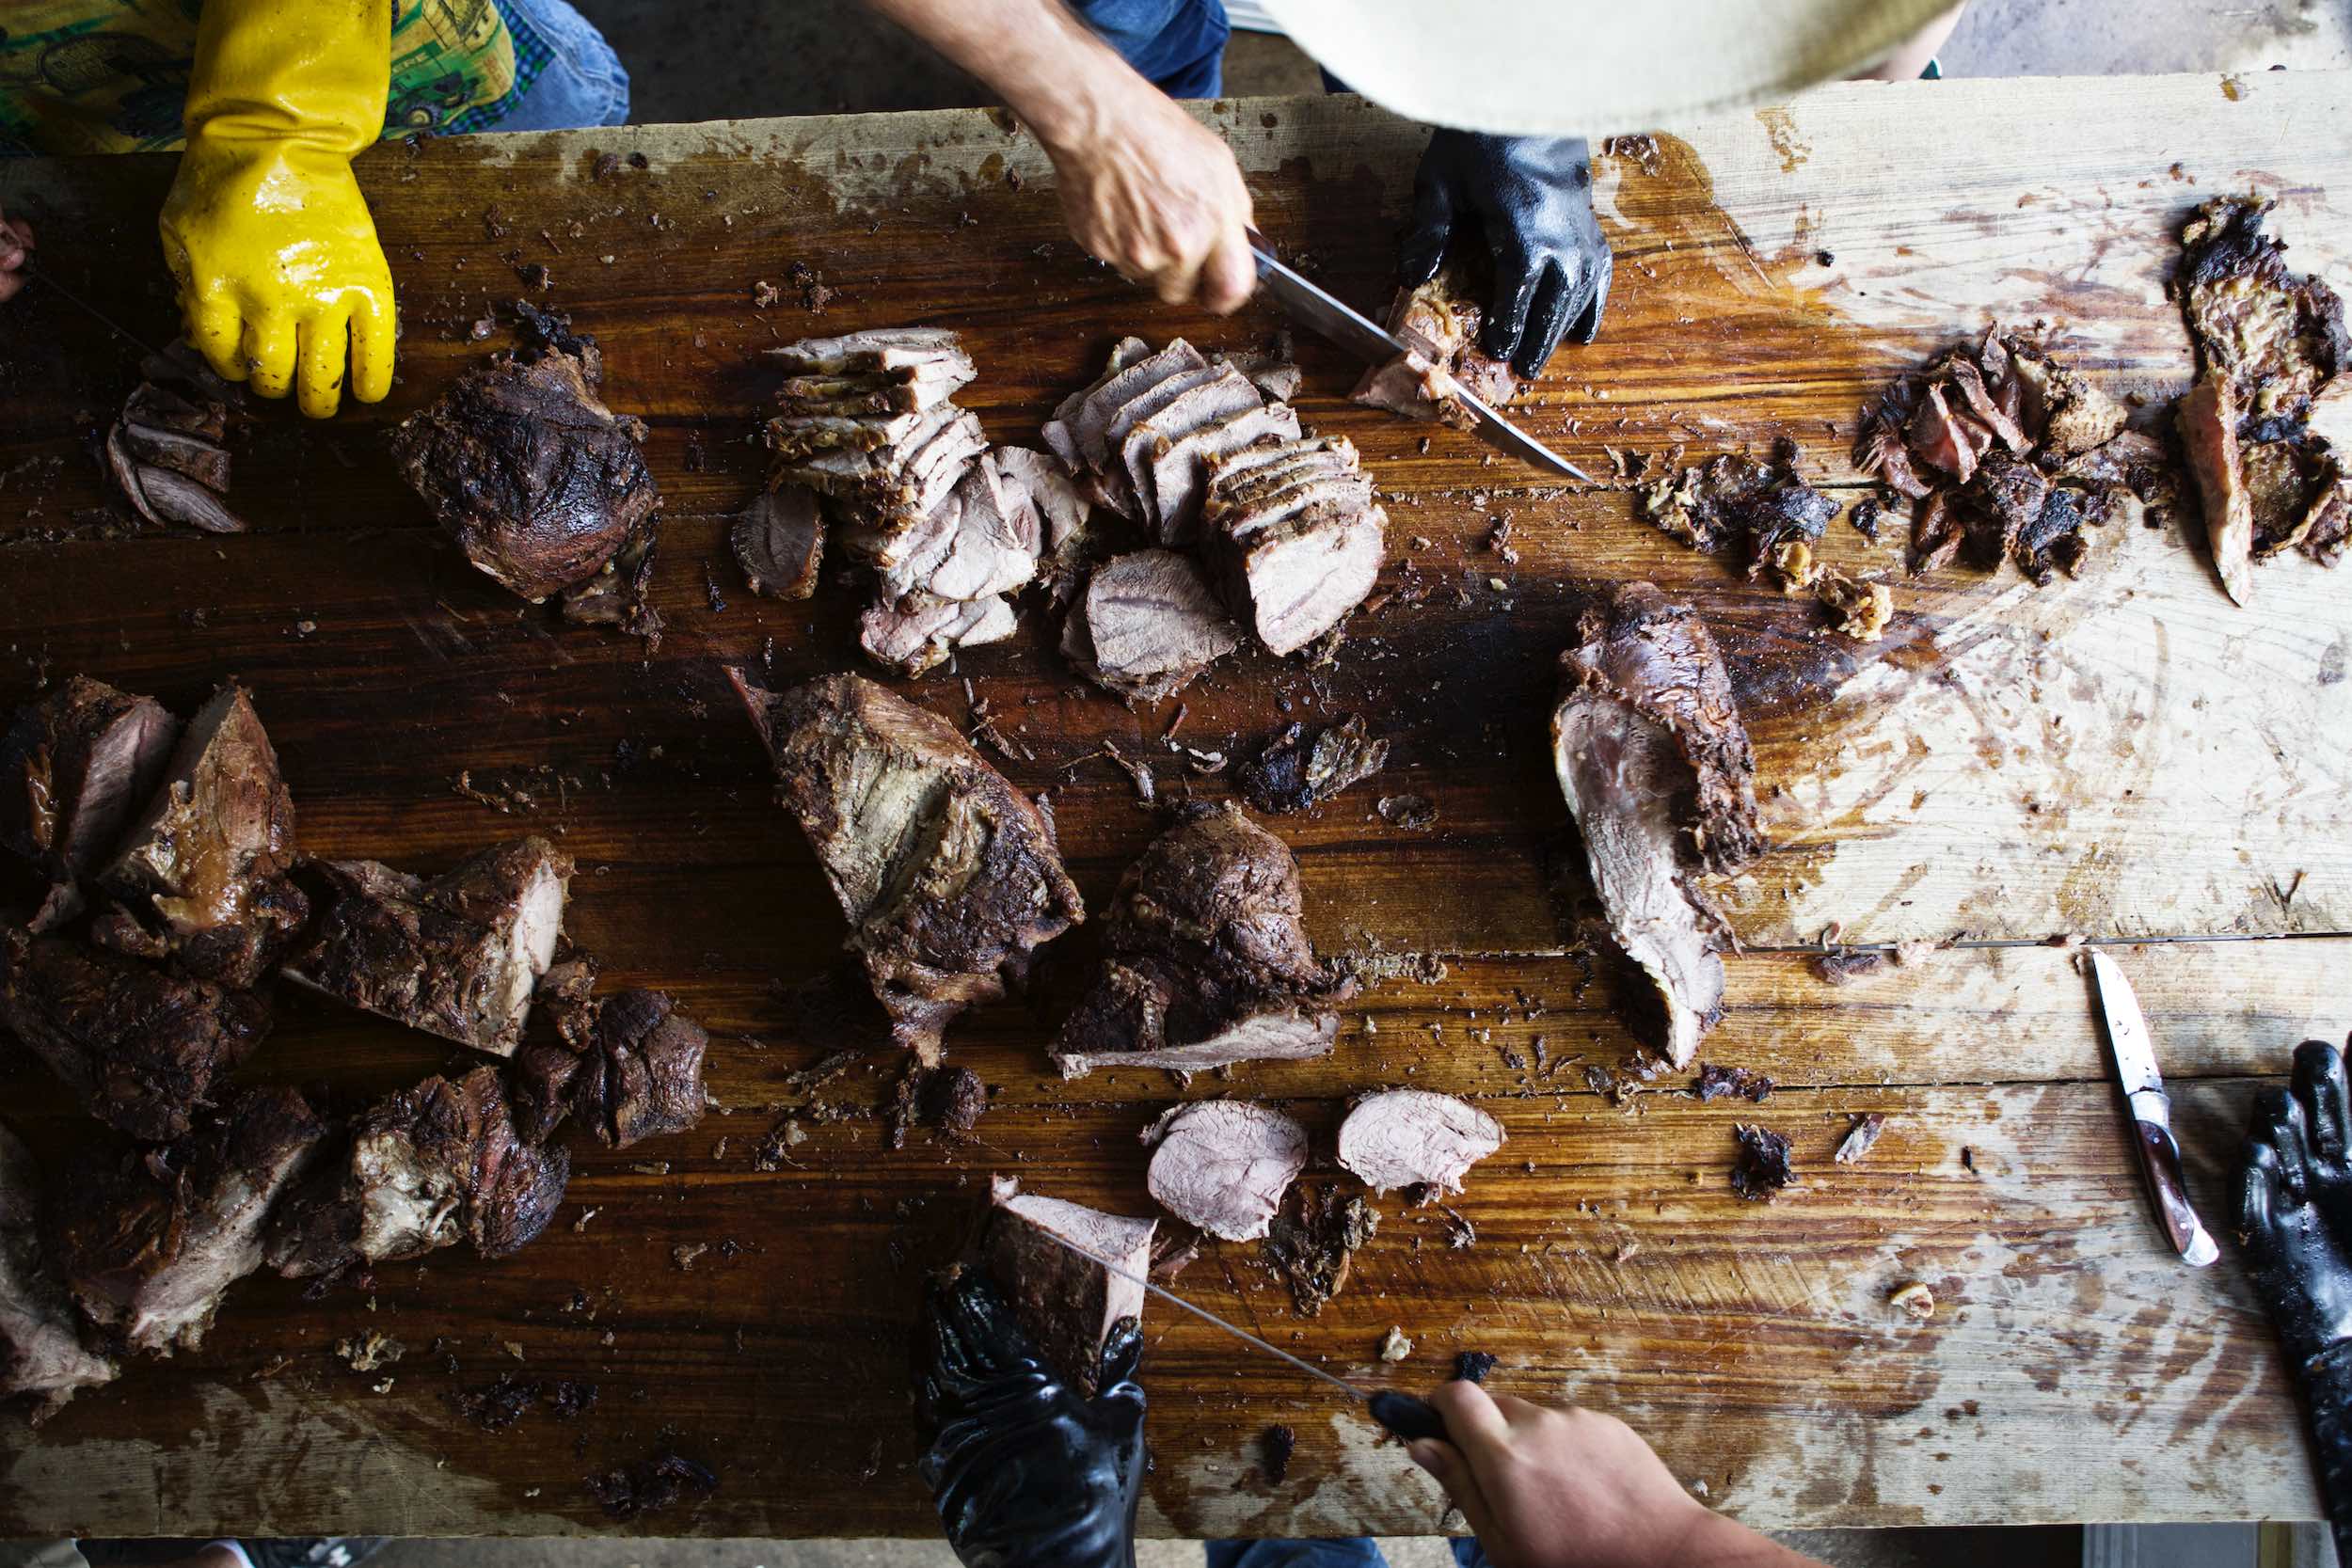 Jody Horton Photography - Smoked meats prepared and sliced on large wood table.